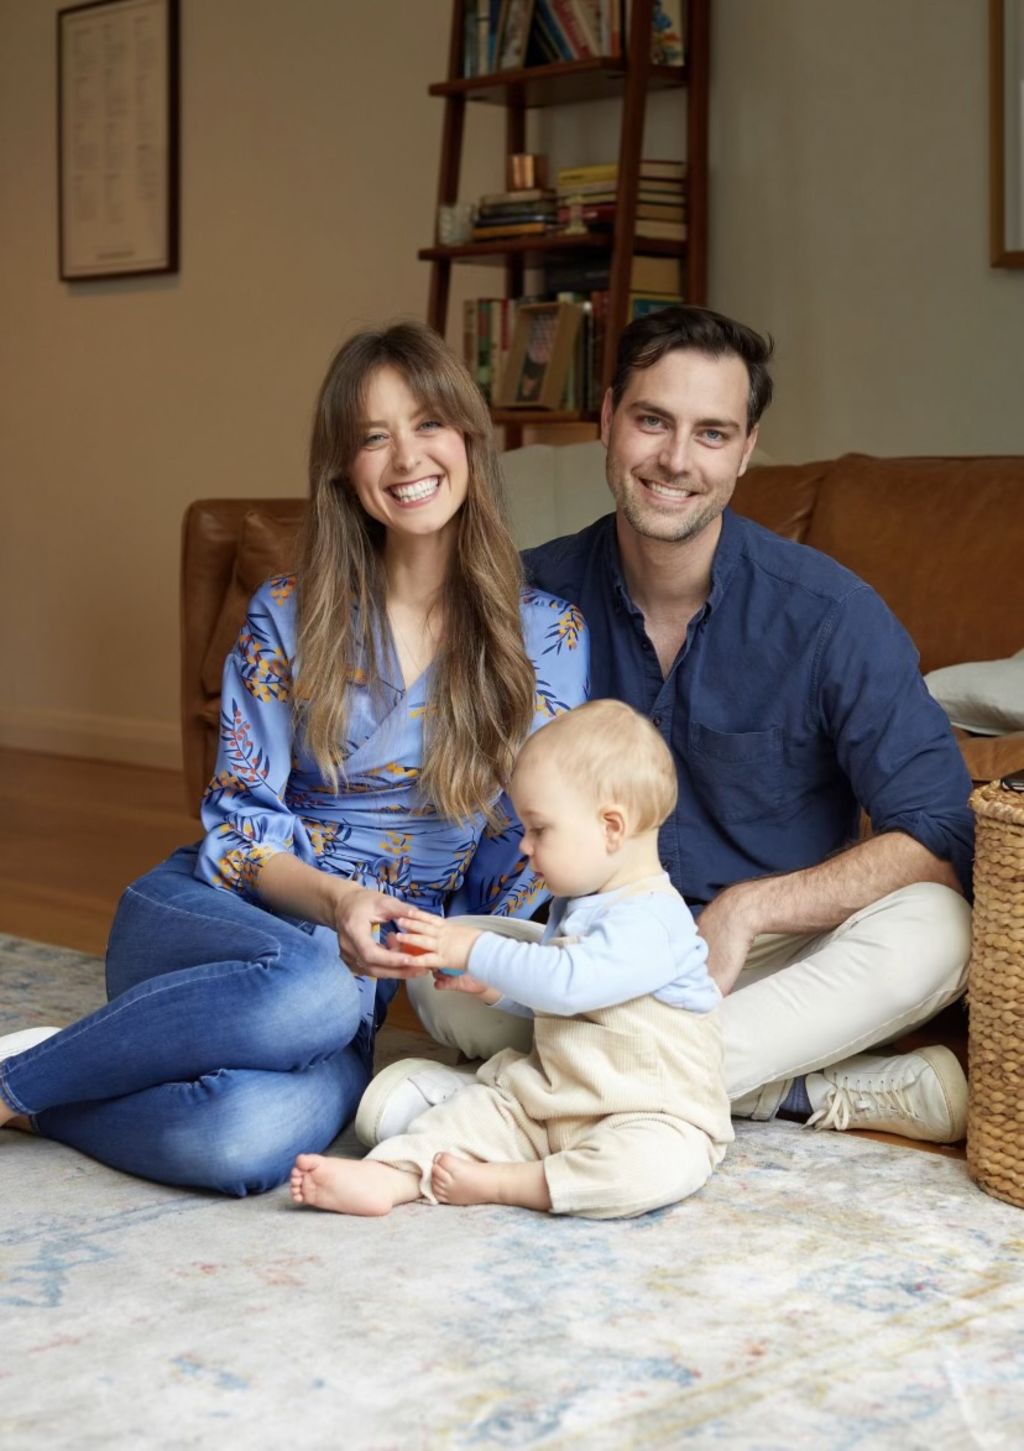 Susannah and Chris Kohler at home with their son, John. Photo: Supplied